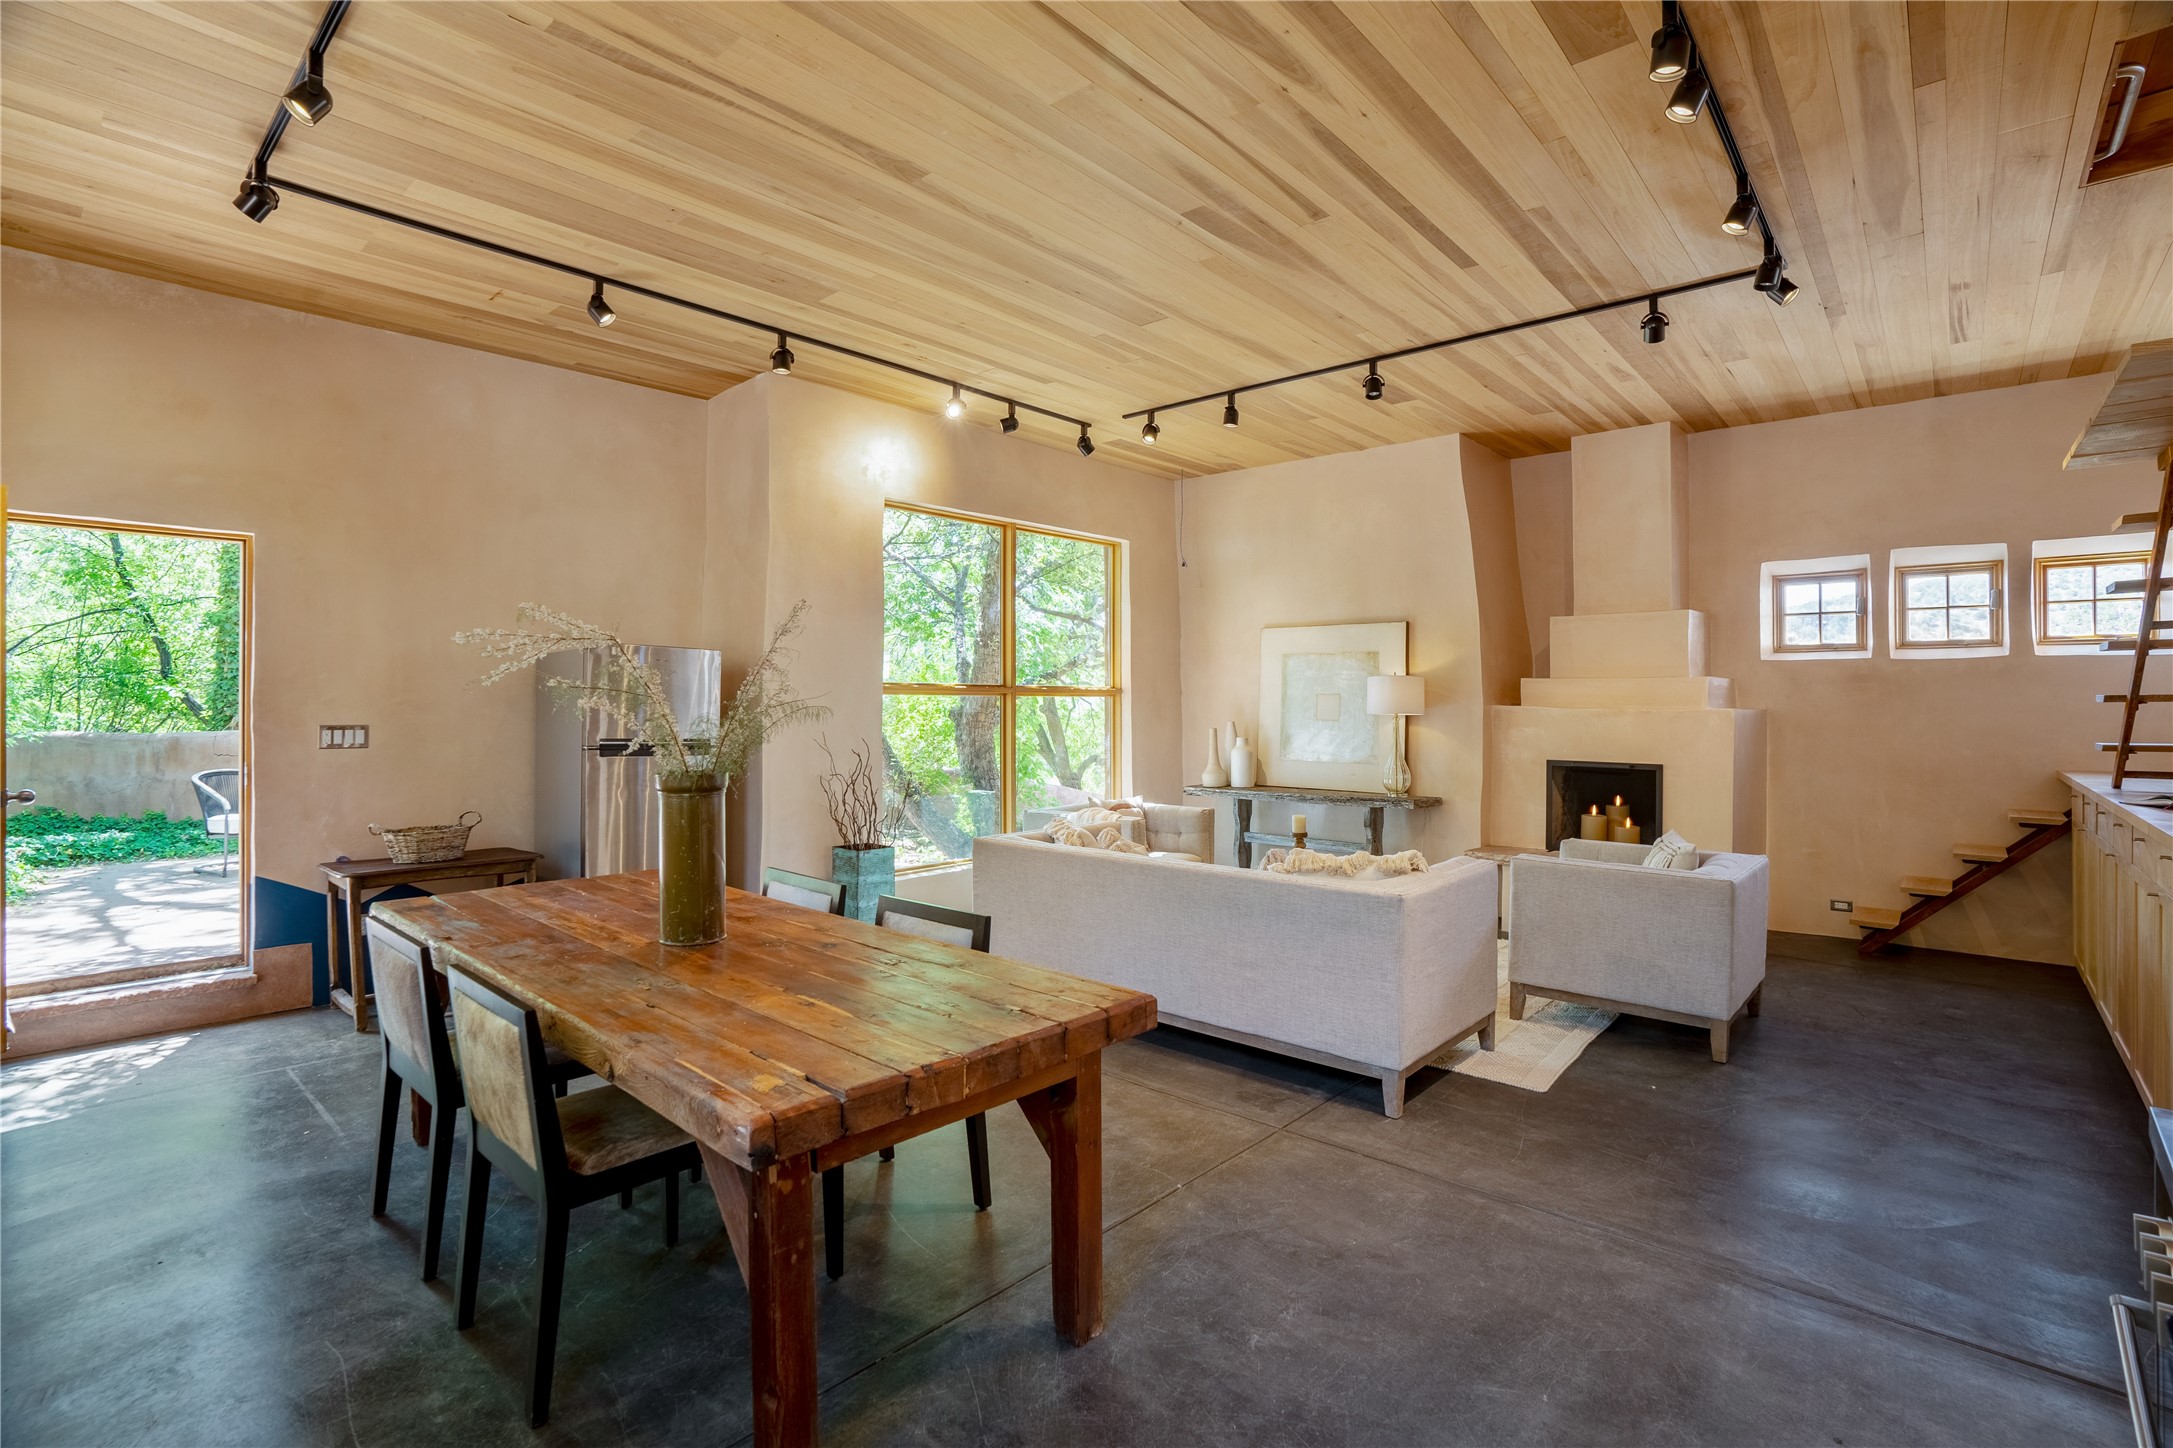 1710 Upper Canyon Road B, Santa Fe, New Mexico 87501, 2 Bedrooms Bedrooms, ,1 BathroomBathrooms,Residential,For Sale,1710 Upper Canyon Road B,202231900